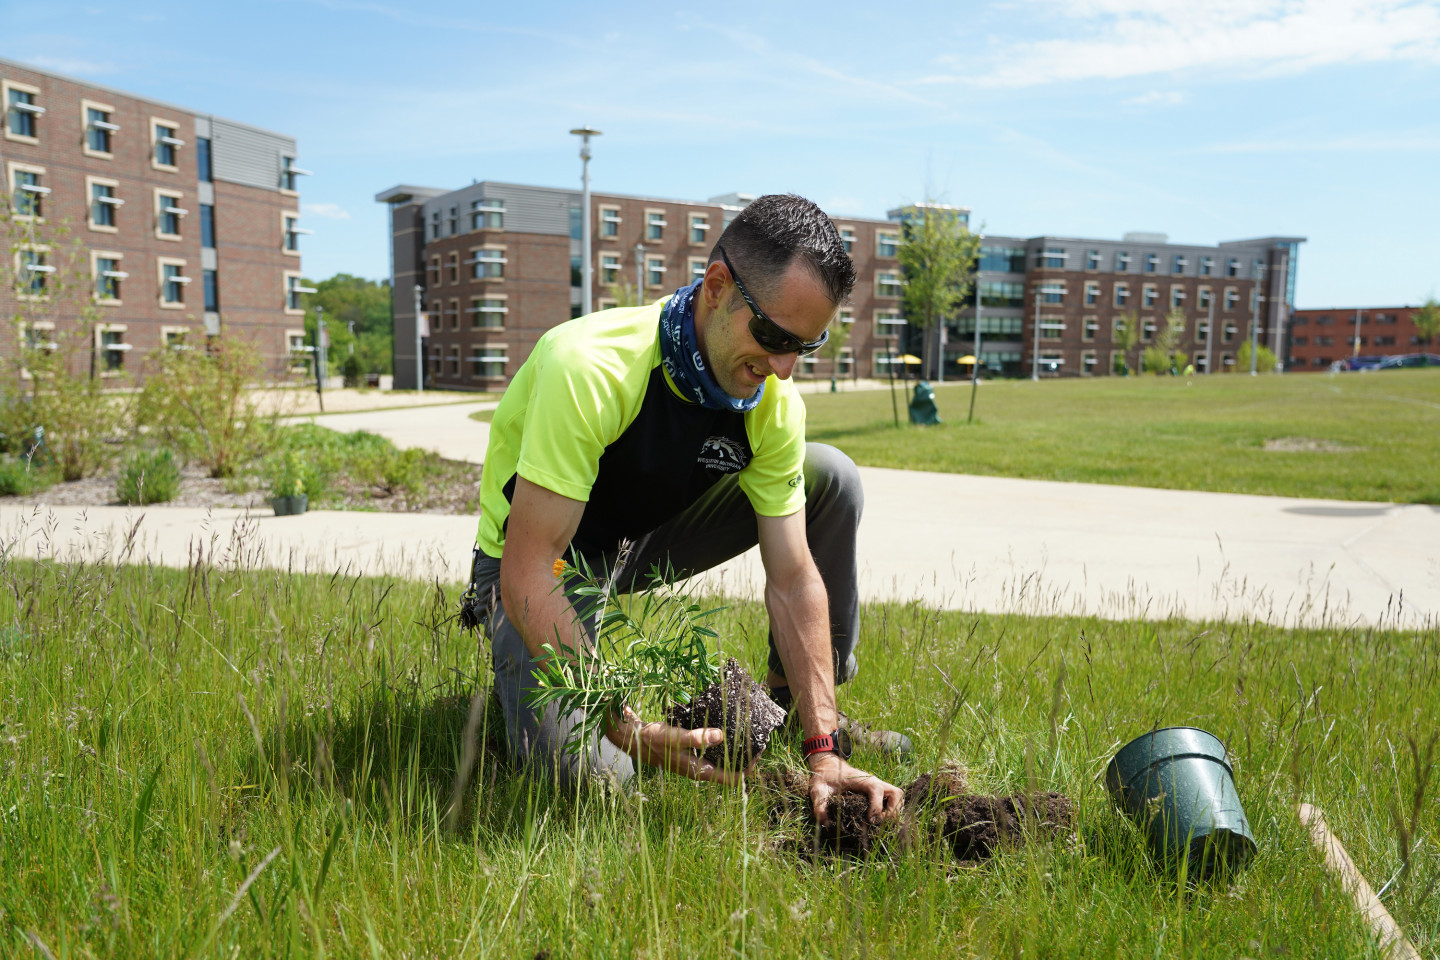 A WMU employee plants a seedling in the grass on campus.